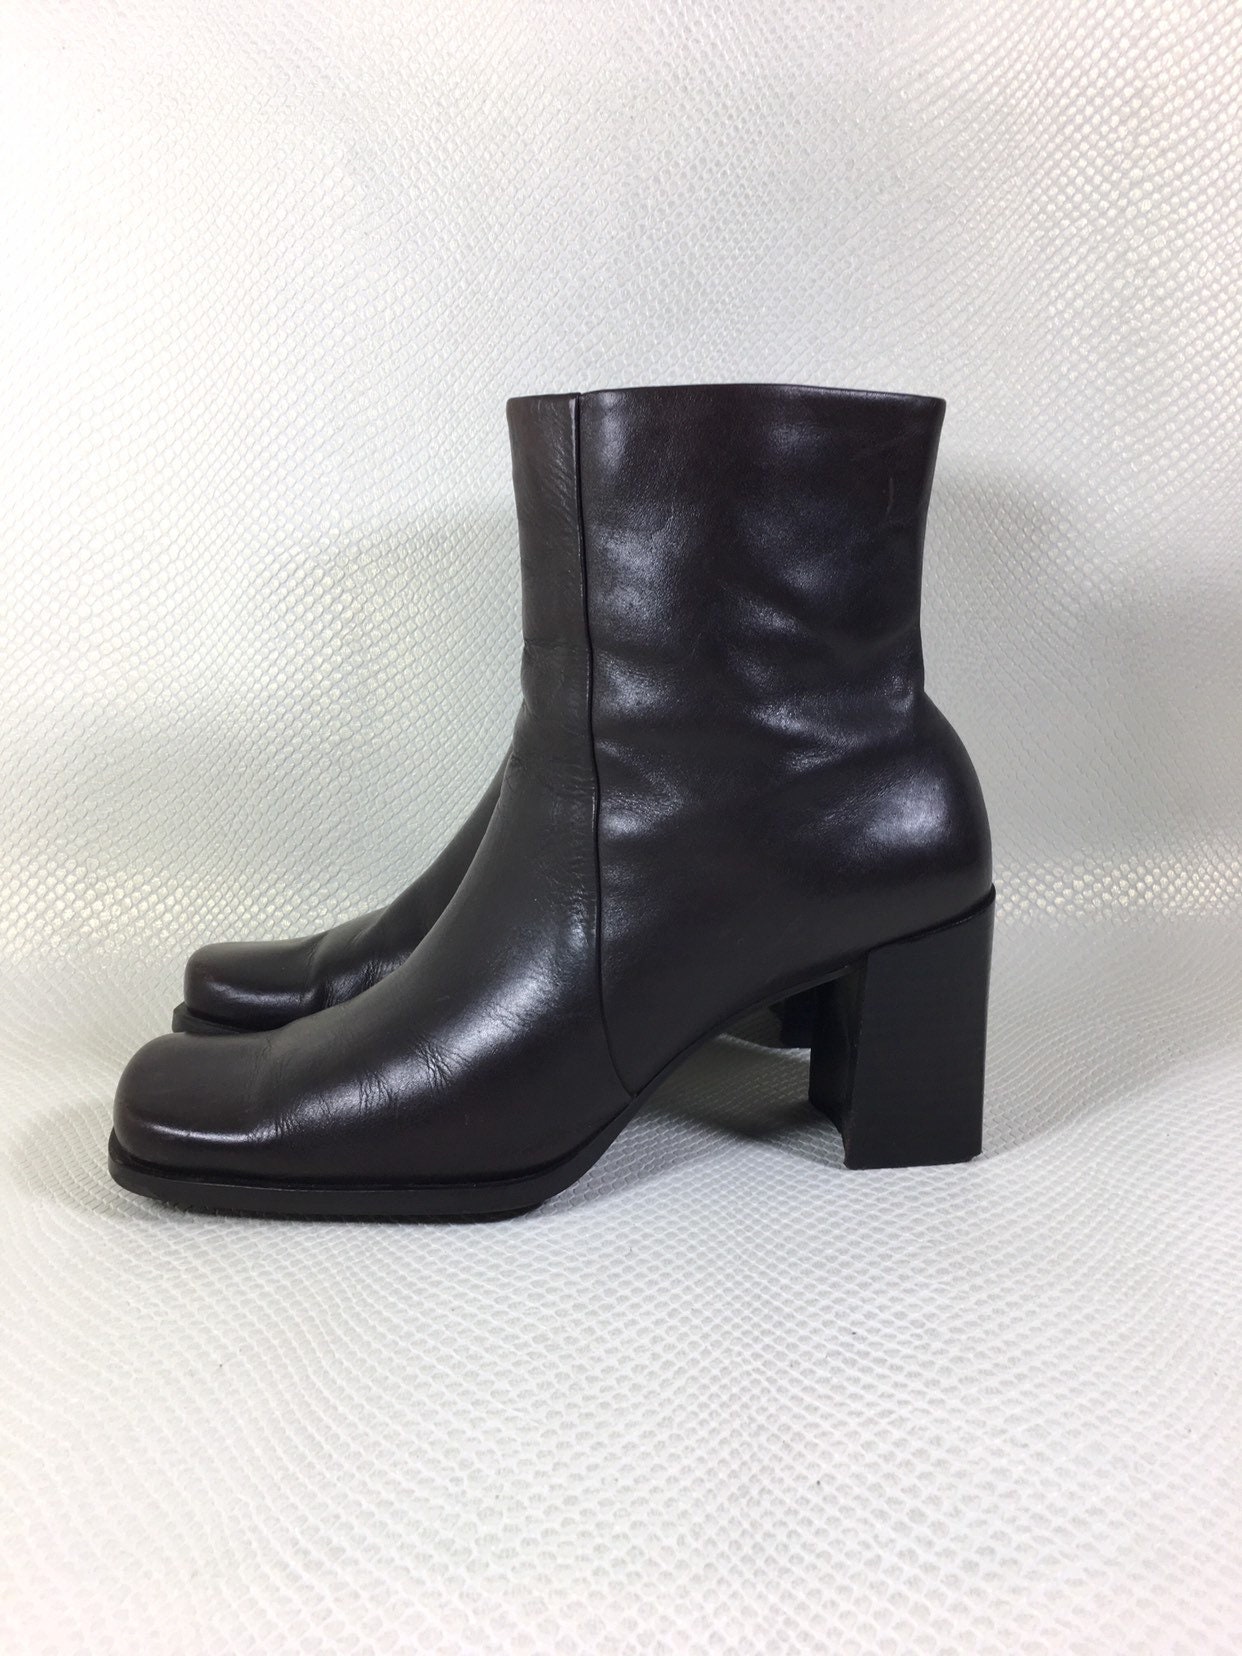 90s Vintage Square Toe Square Chunky Heel Brown Leather Boots 7.5 ...